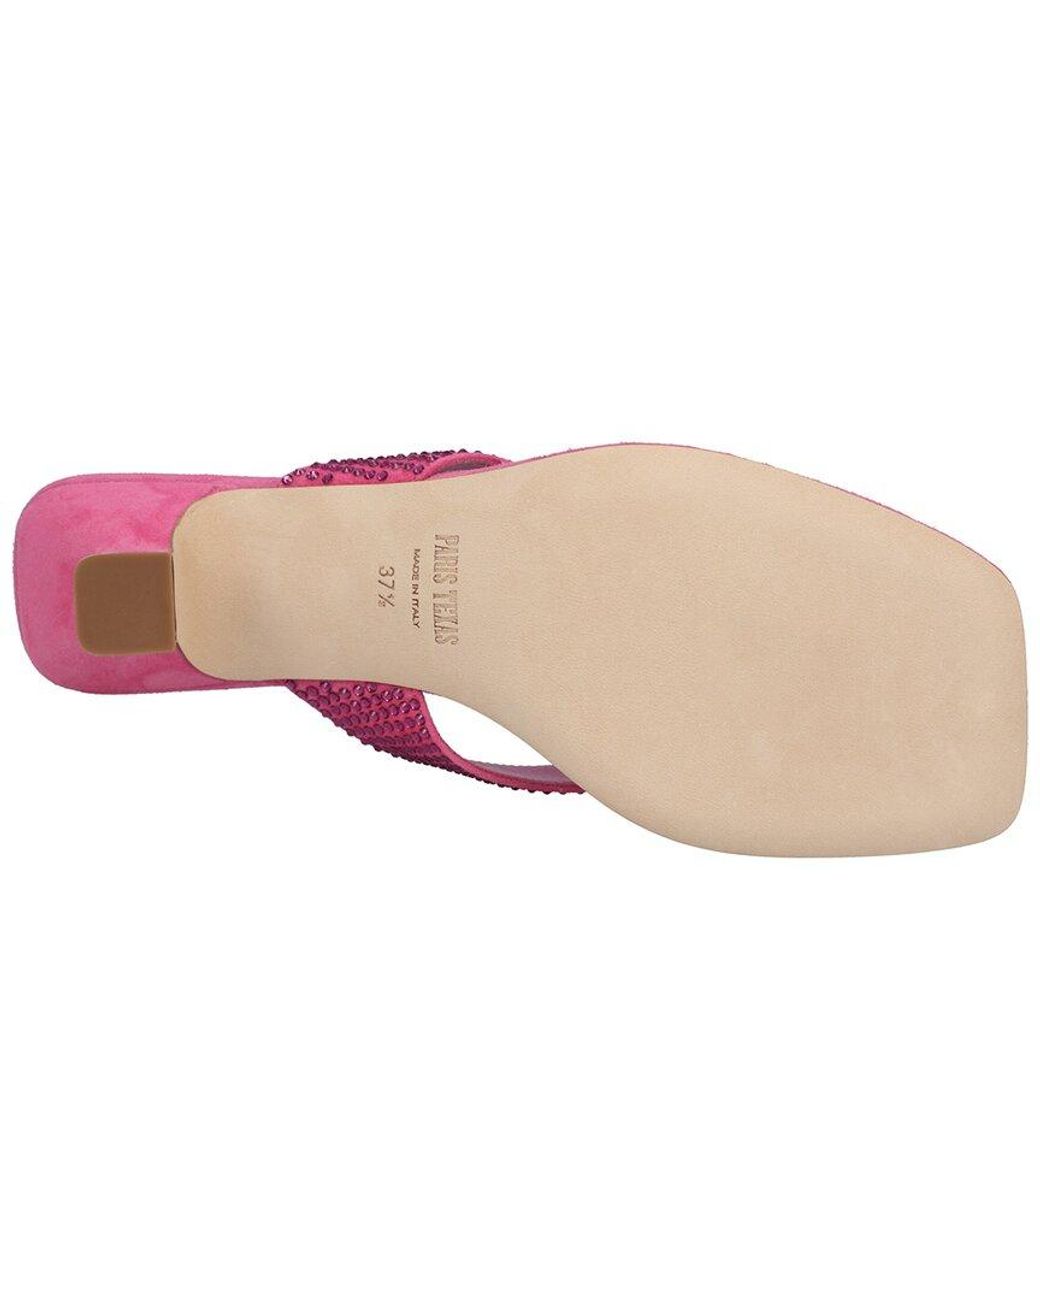 Paris Texas Holly Portofino Suede Sandal in Pink Ruby (Pink) - Save 1% |  Lyst